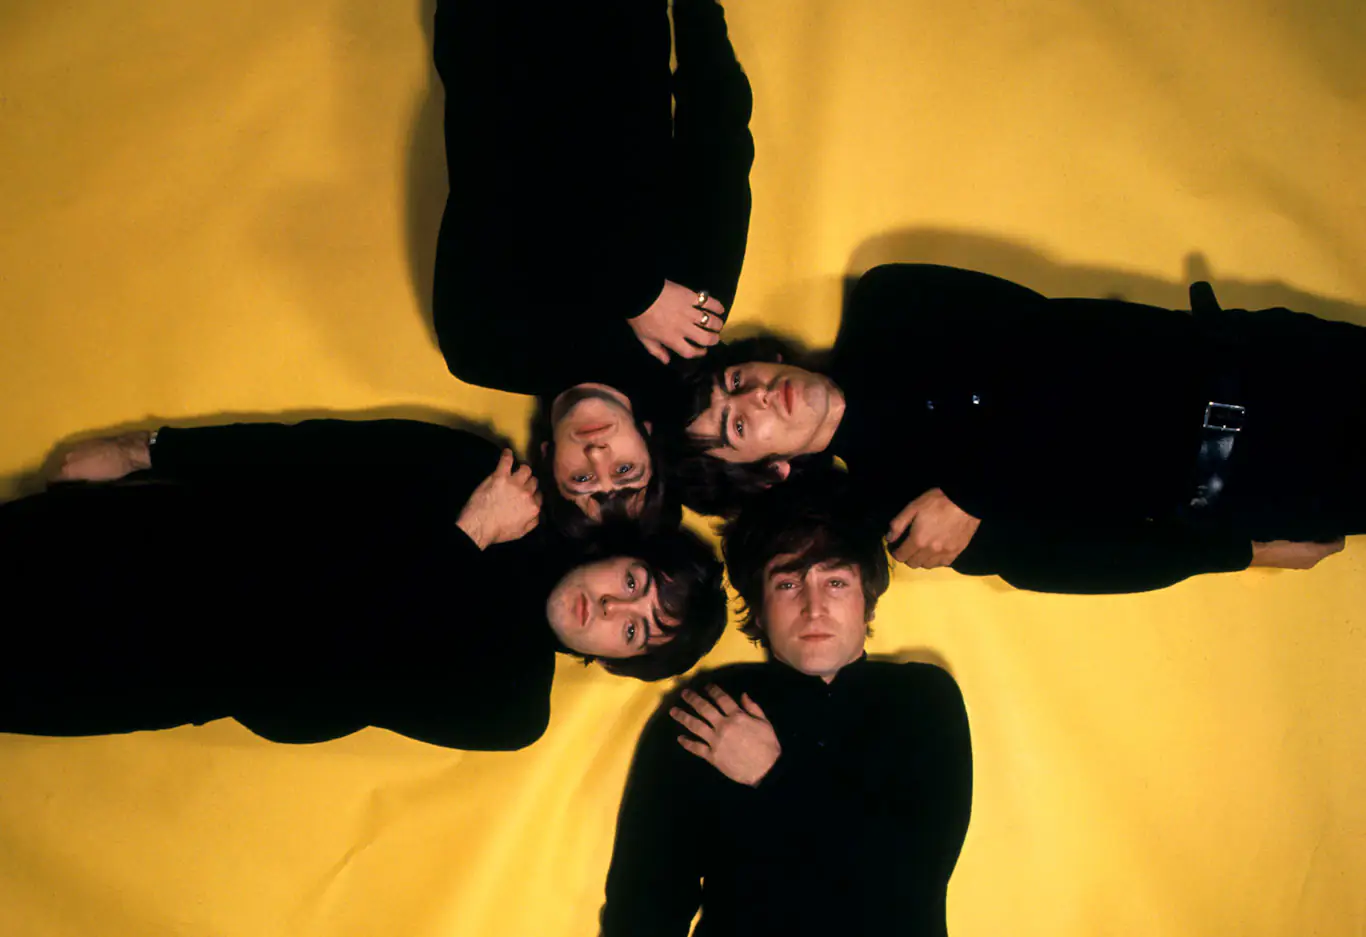 The Last Beatles Song – ‘Now And Then’ To Be Released Worldwide